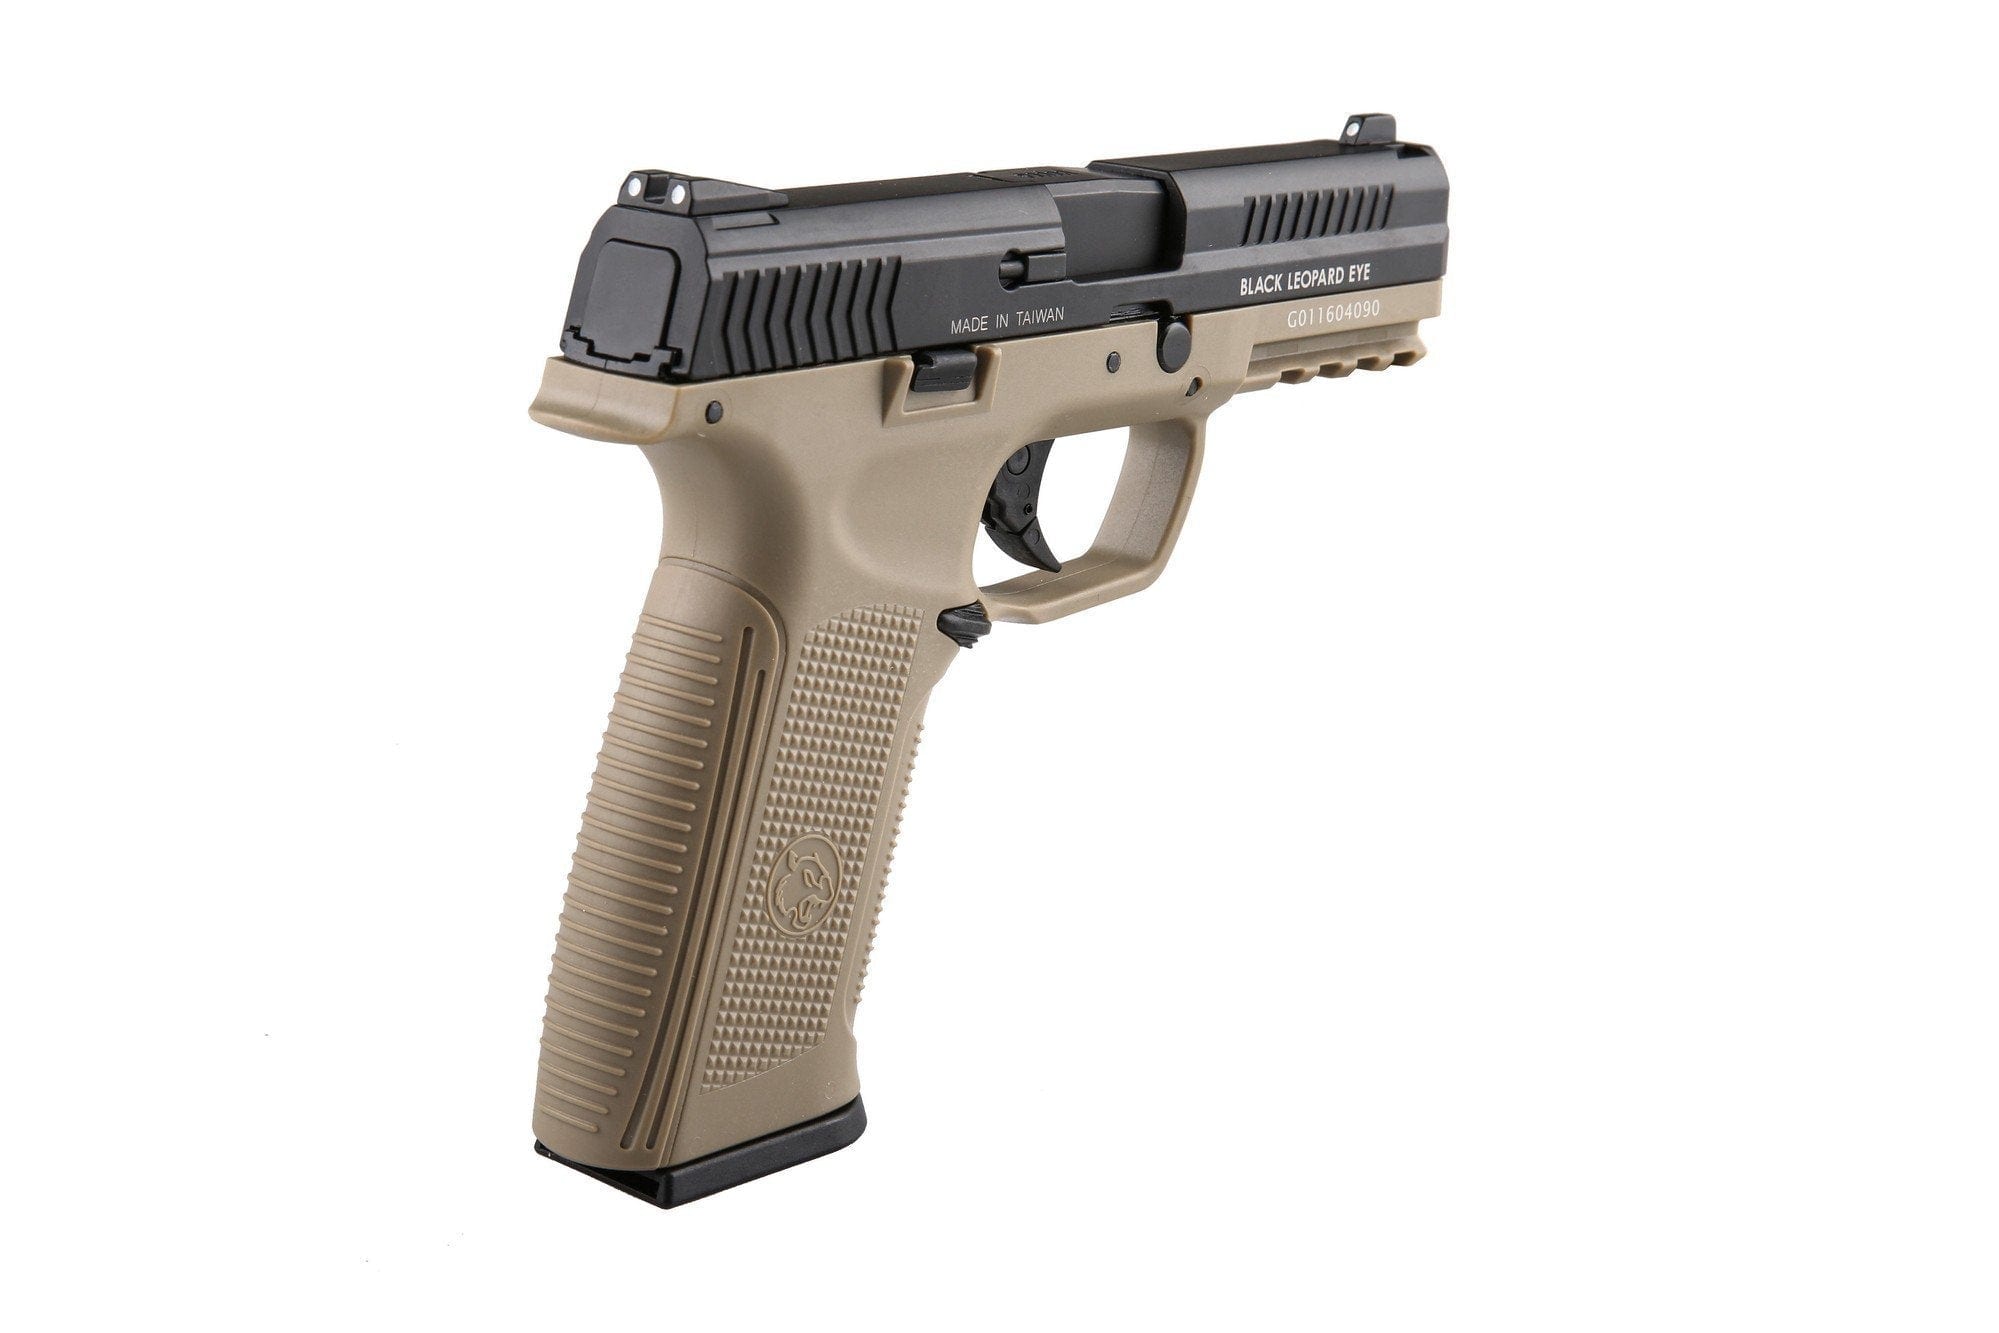 BLE - Alpha Pistol Replica - Black / Tan by ICS on Airsoft Mania Europe